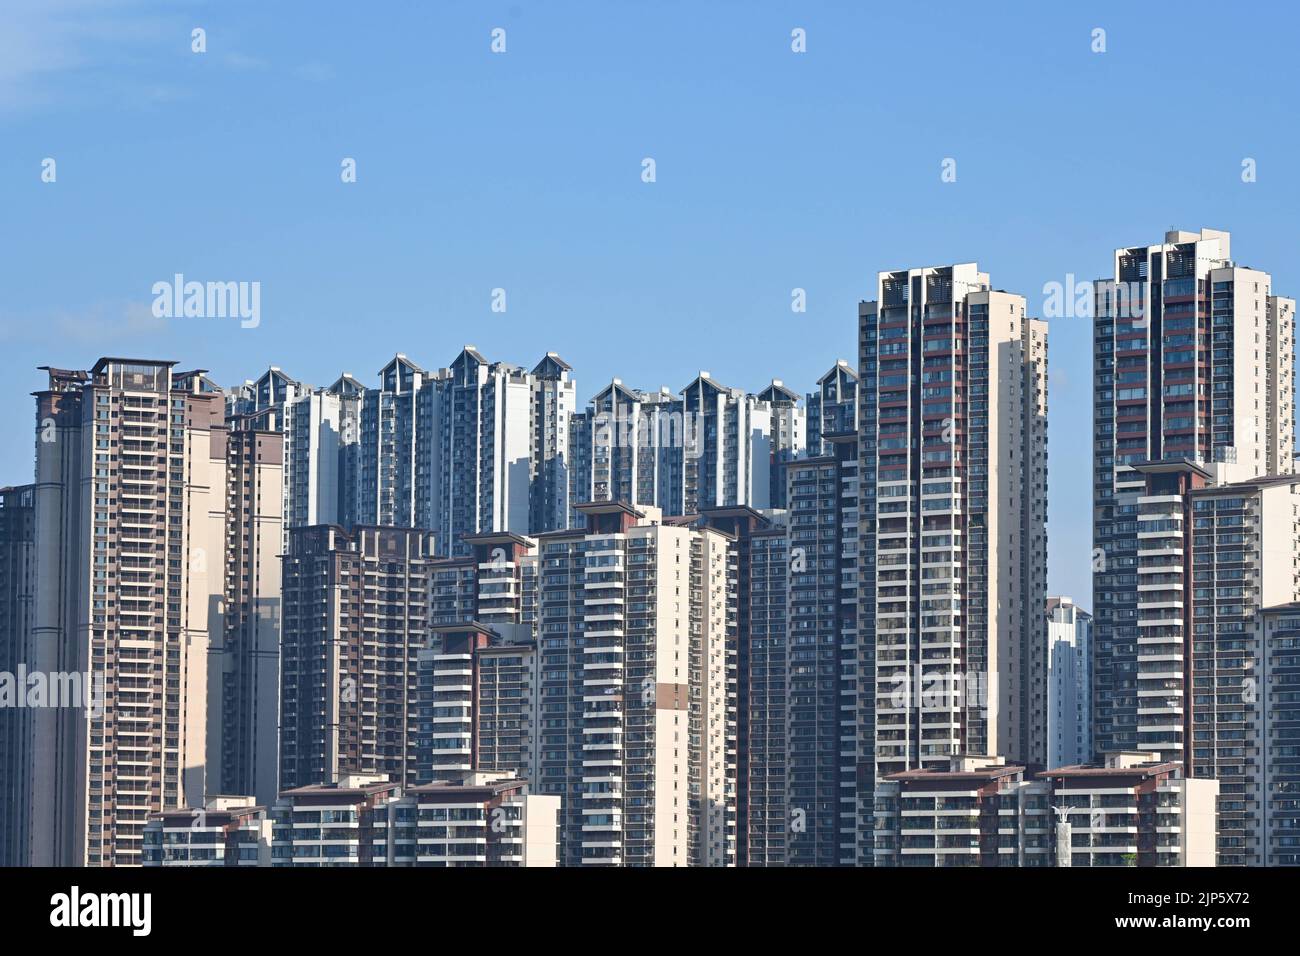 NANNING, CHINA - AUGUST 15, 2022 - A real estate complex under construction is seen in an urban area in Nanning, South China's Guangxi Zhuang autonomo Stock Photo